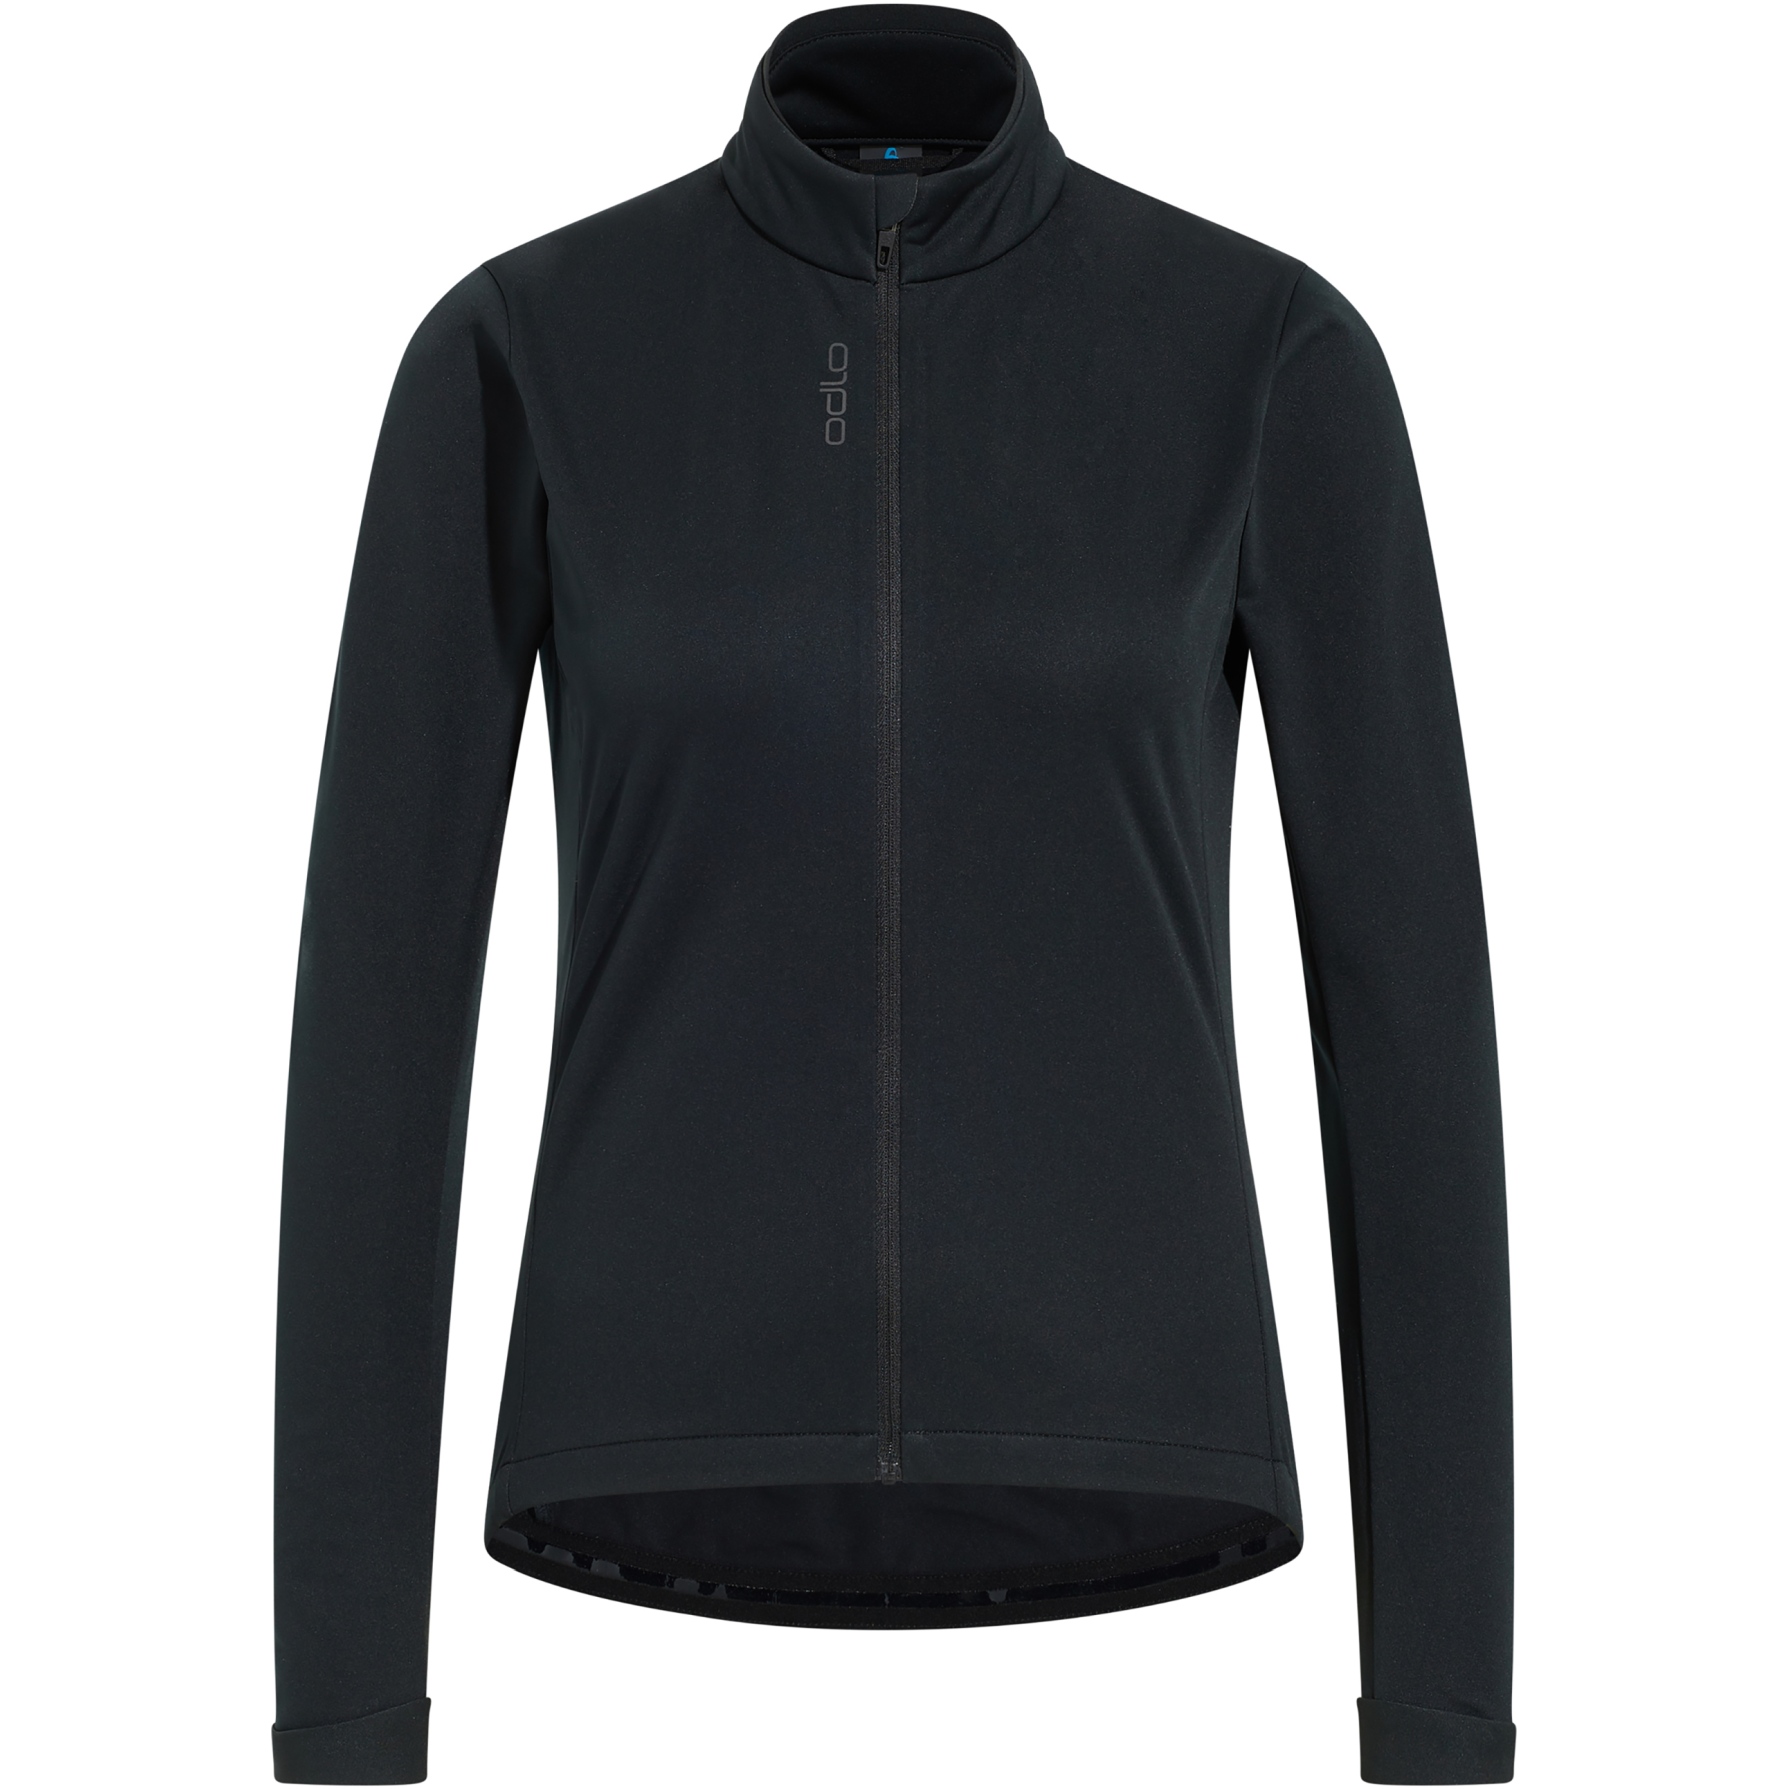 Picture of Odlo Zeroweight Warm Cycling Jacket Women - black